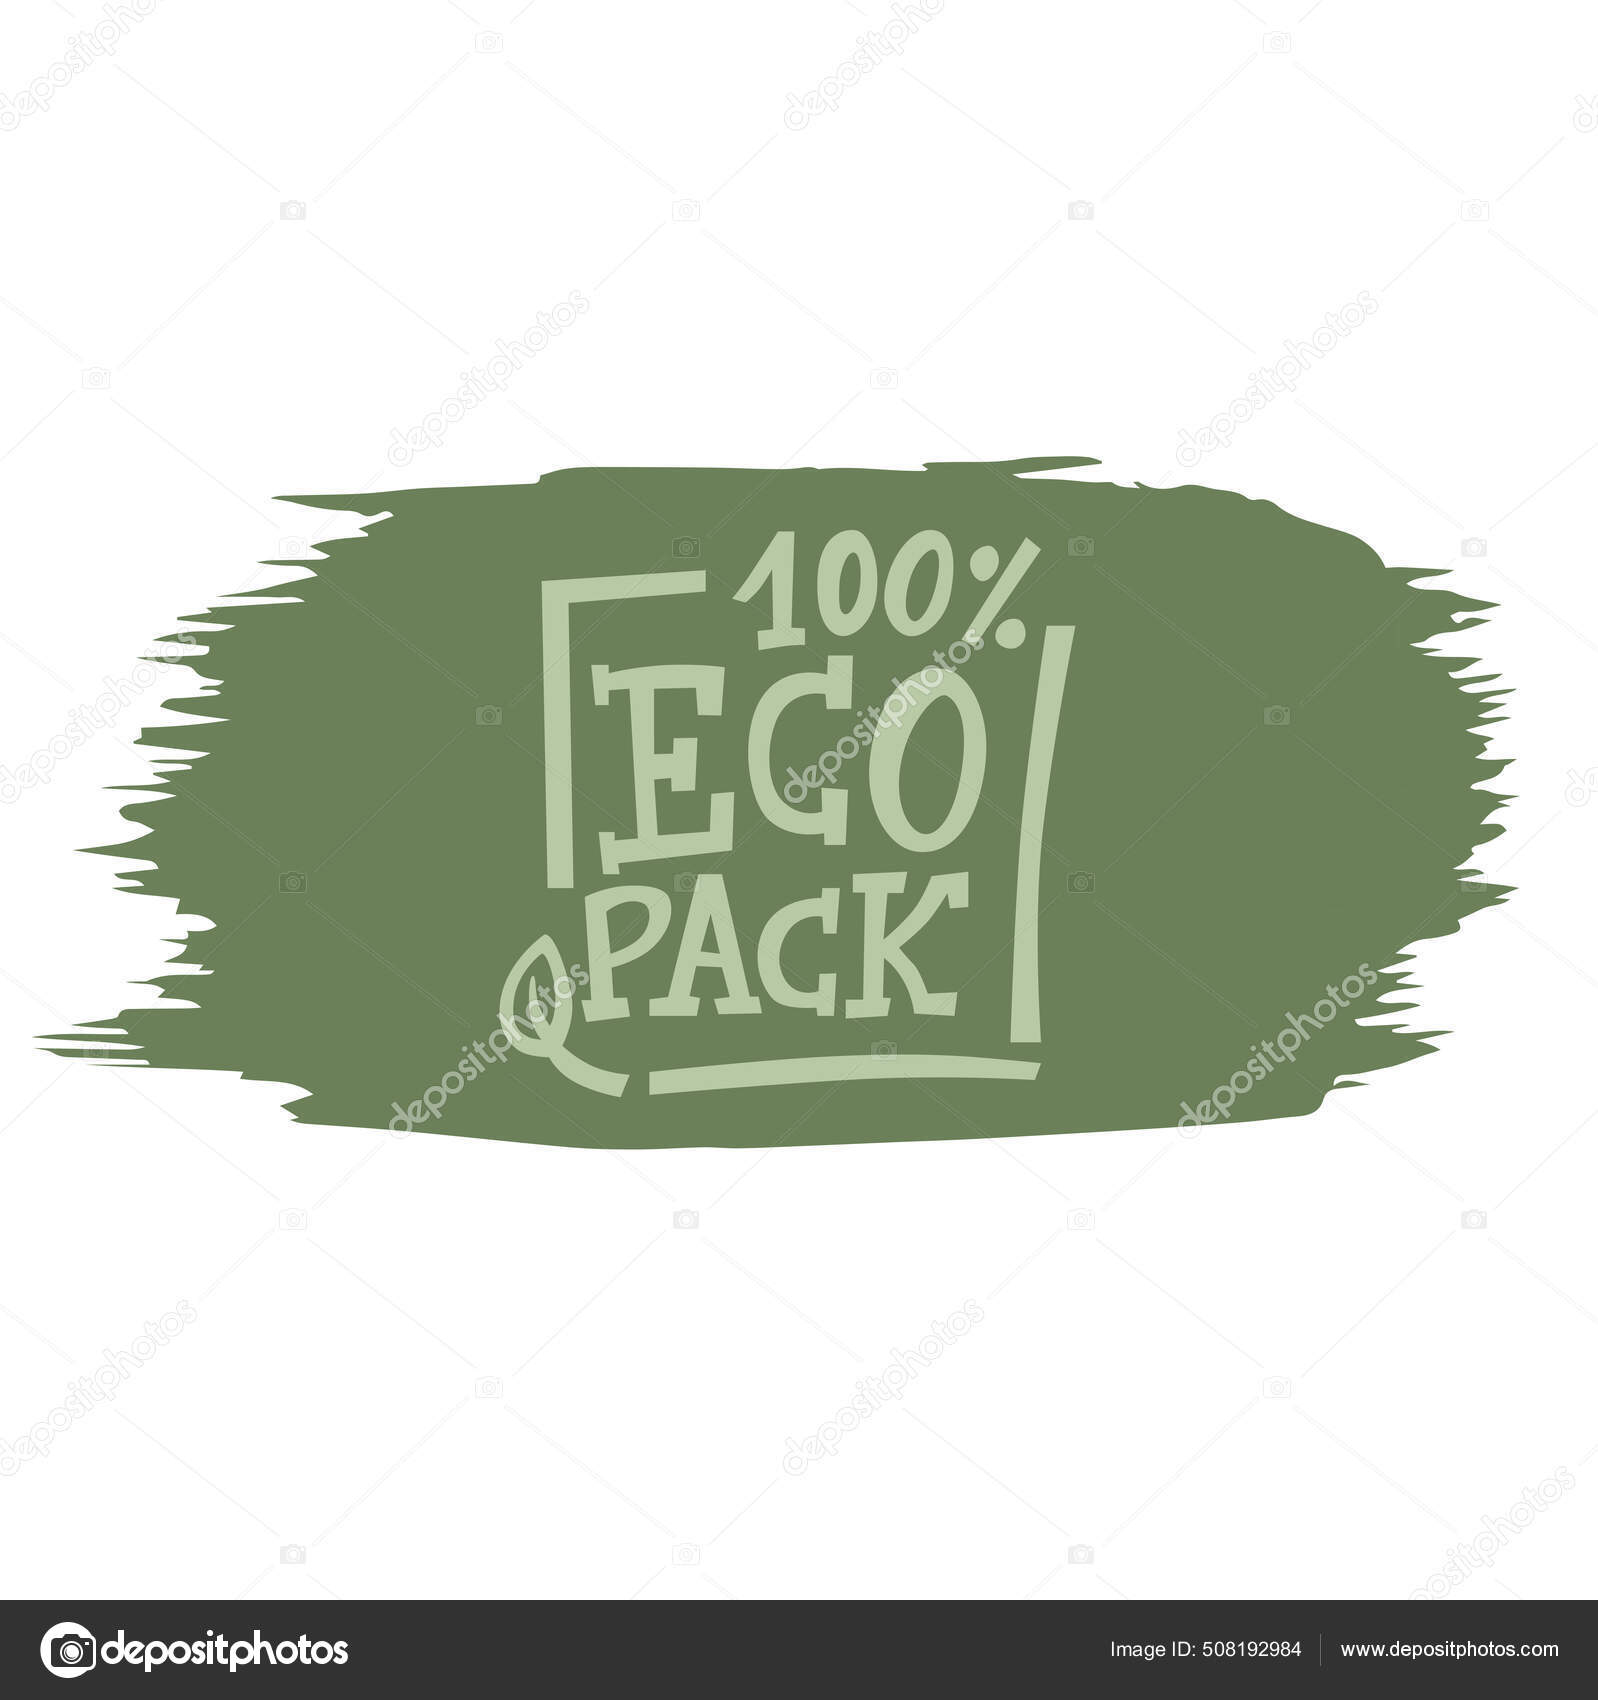 Eco pack handwritten sign of eco friendly, natural and organic labels for print packaging biodegradable, compostable, products. Lettering stock illustration on white background. Stock Vector by ©l.v.l 508192984